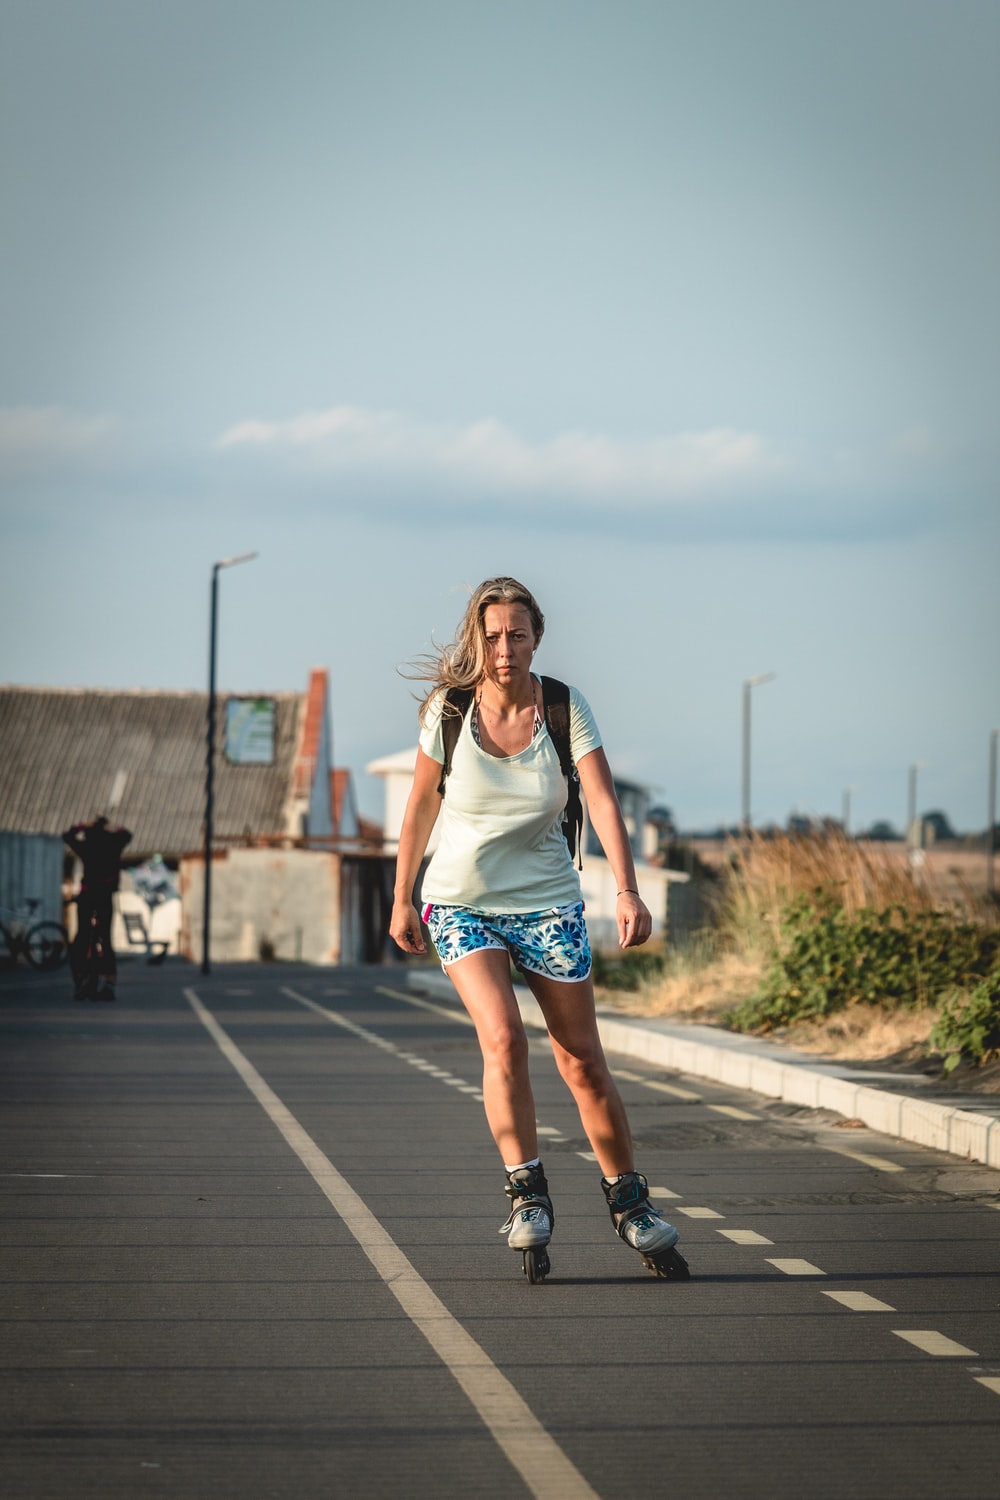 Rollerblading Picture. Download Free Image